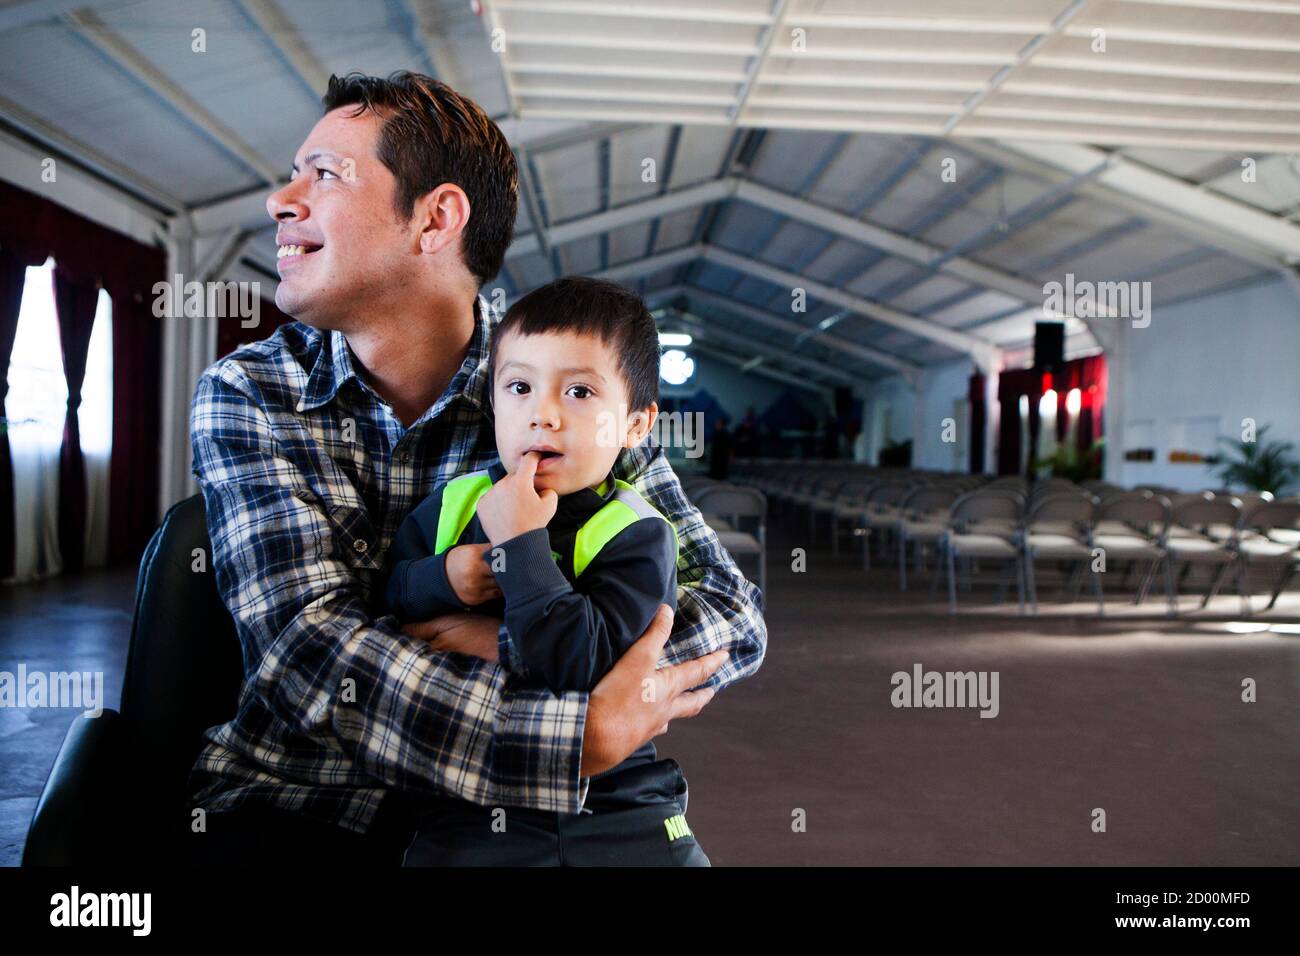 David Amaya holds 3-year-old Isaac Moreno, a young boy in daycare at Iglesia  de Cristo Ministerios Llamada Final in San Diego, California November 24,  2013. Amaya was abducted as a child to